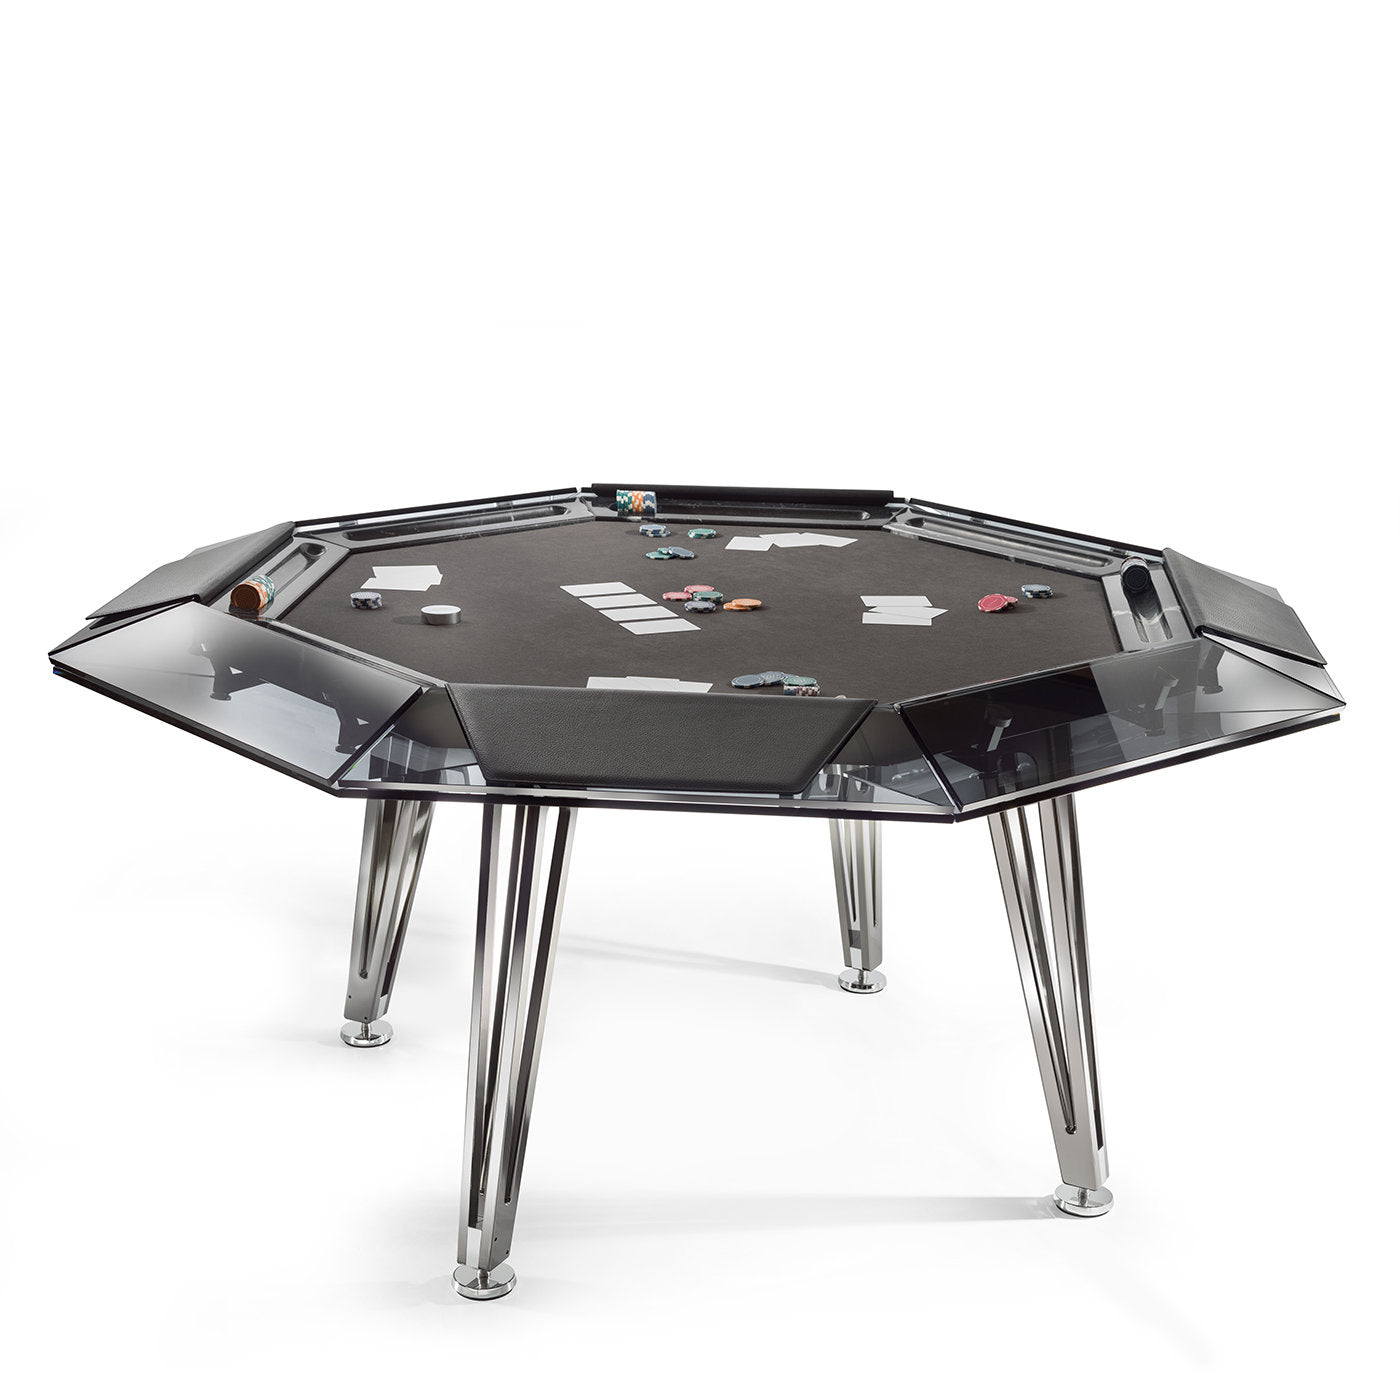 Unootto 8-Player Black Poker Table - Alternative view 1